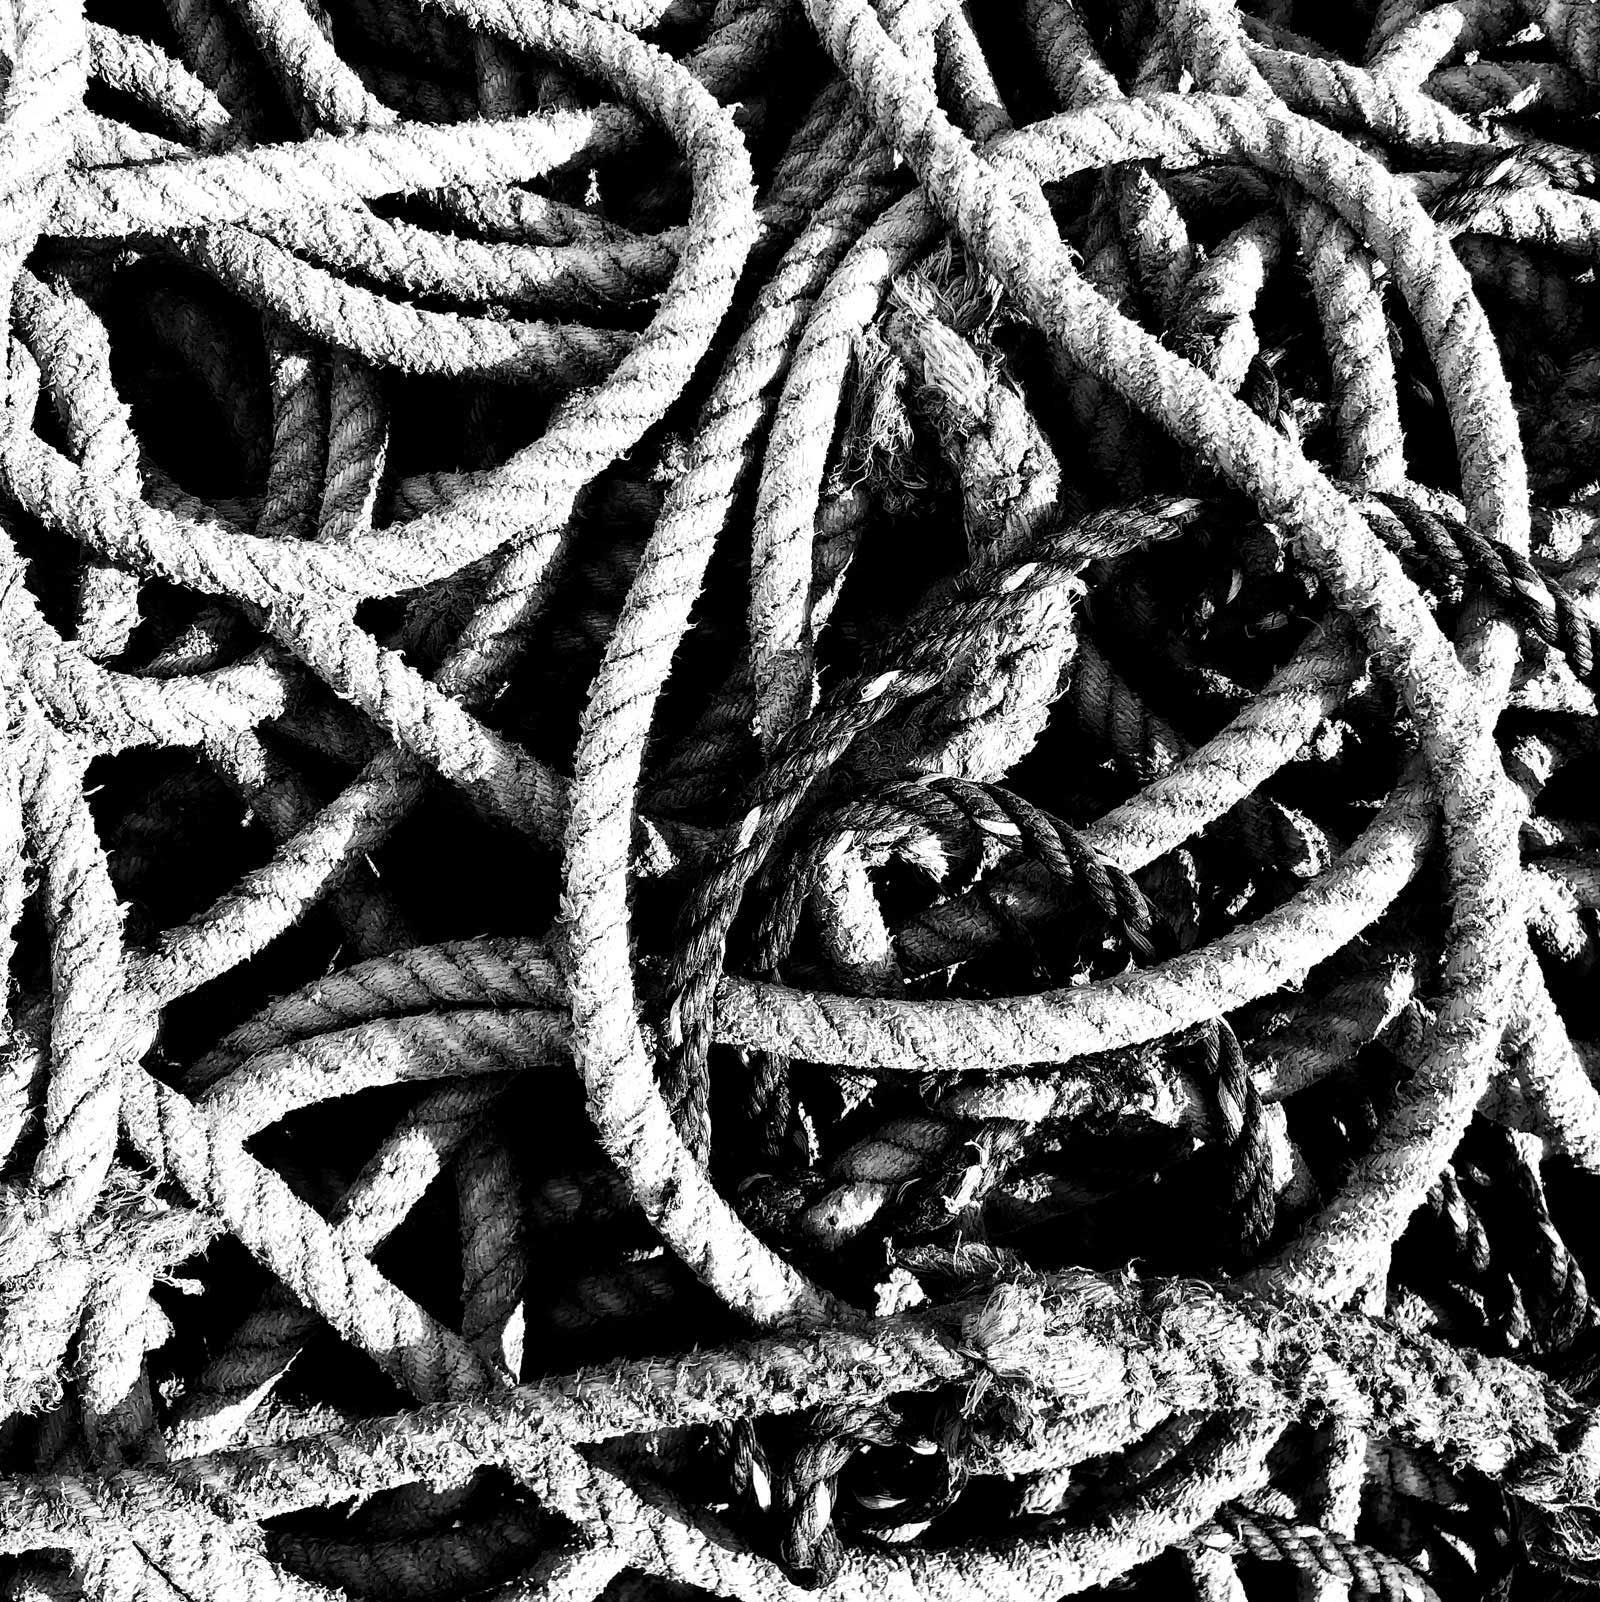 Photograph of rope on harbour